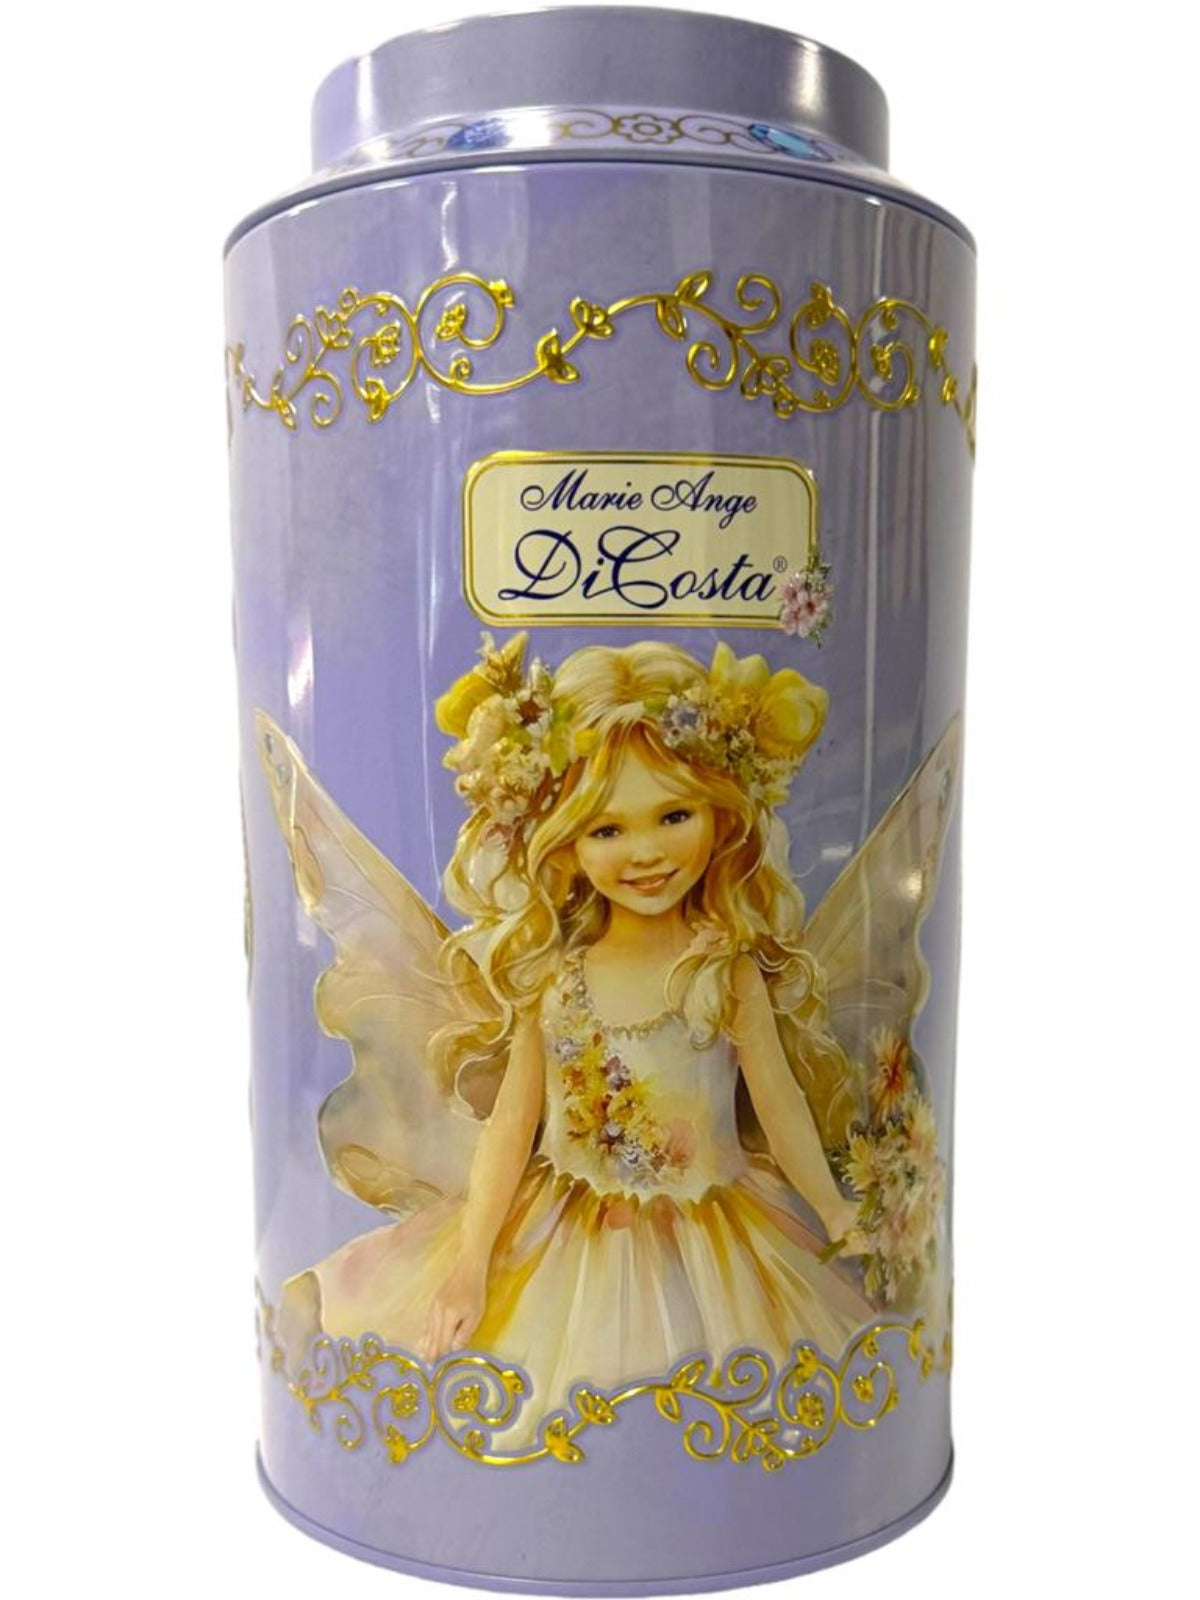 Marie Ange di Costa Flower Fairy Italian Butter Cookies—Il Cilindro in Lavender 250g